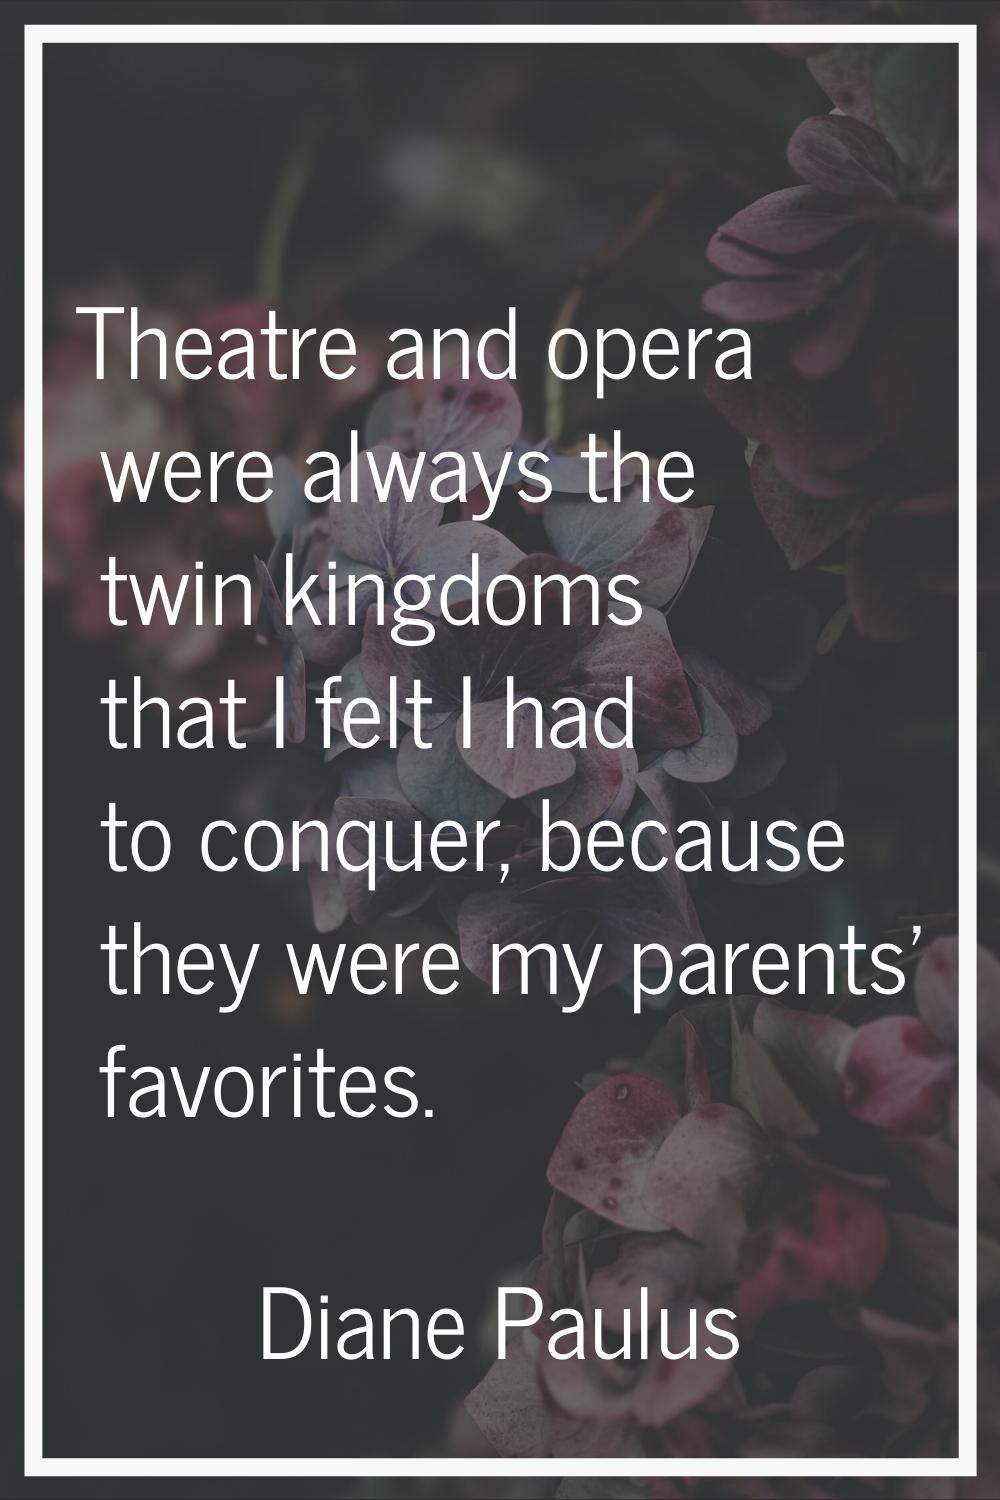 Theatre and opera were always the twin kingdoms that I felt I had to conquer, because they were my 